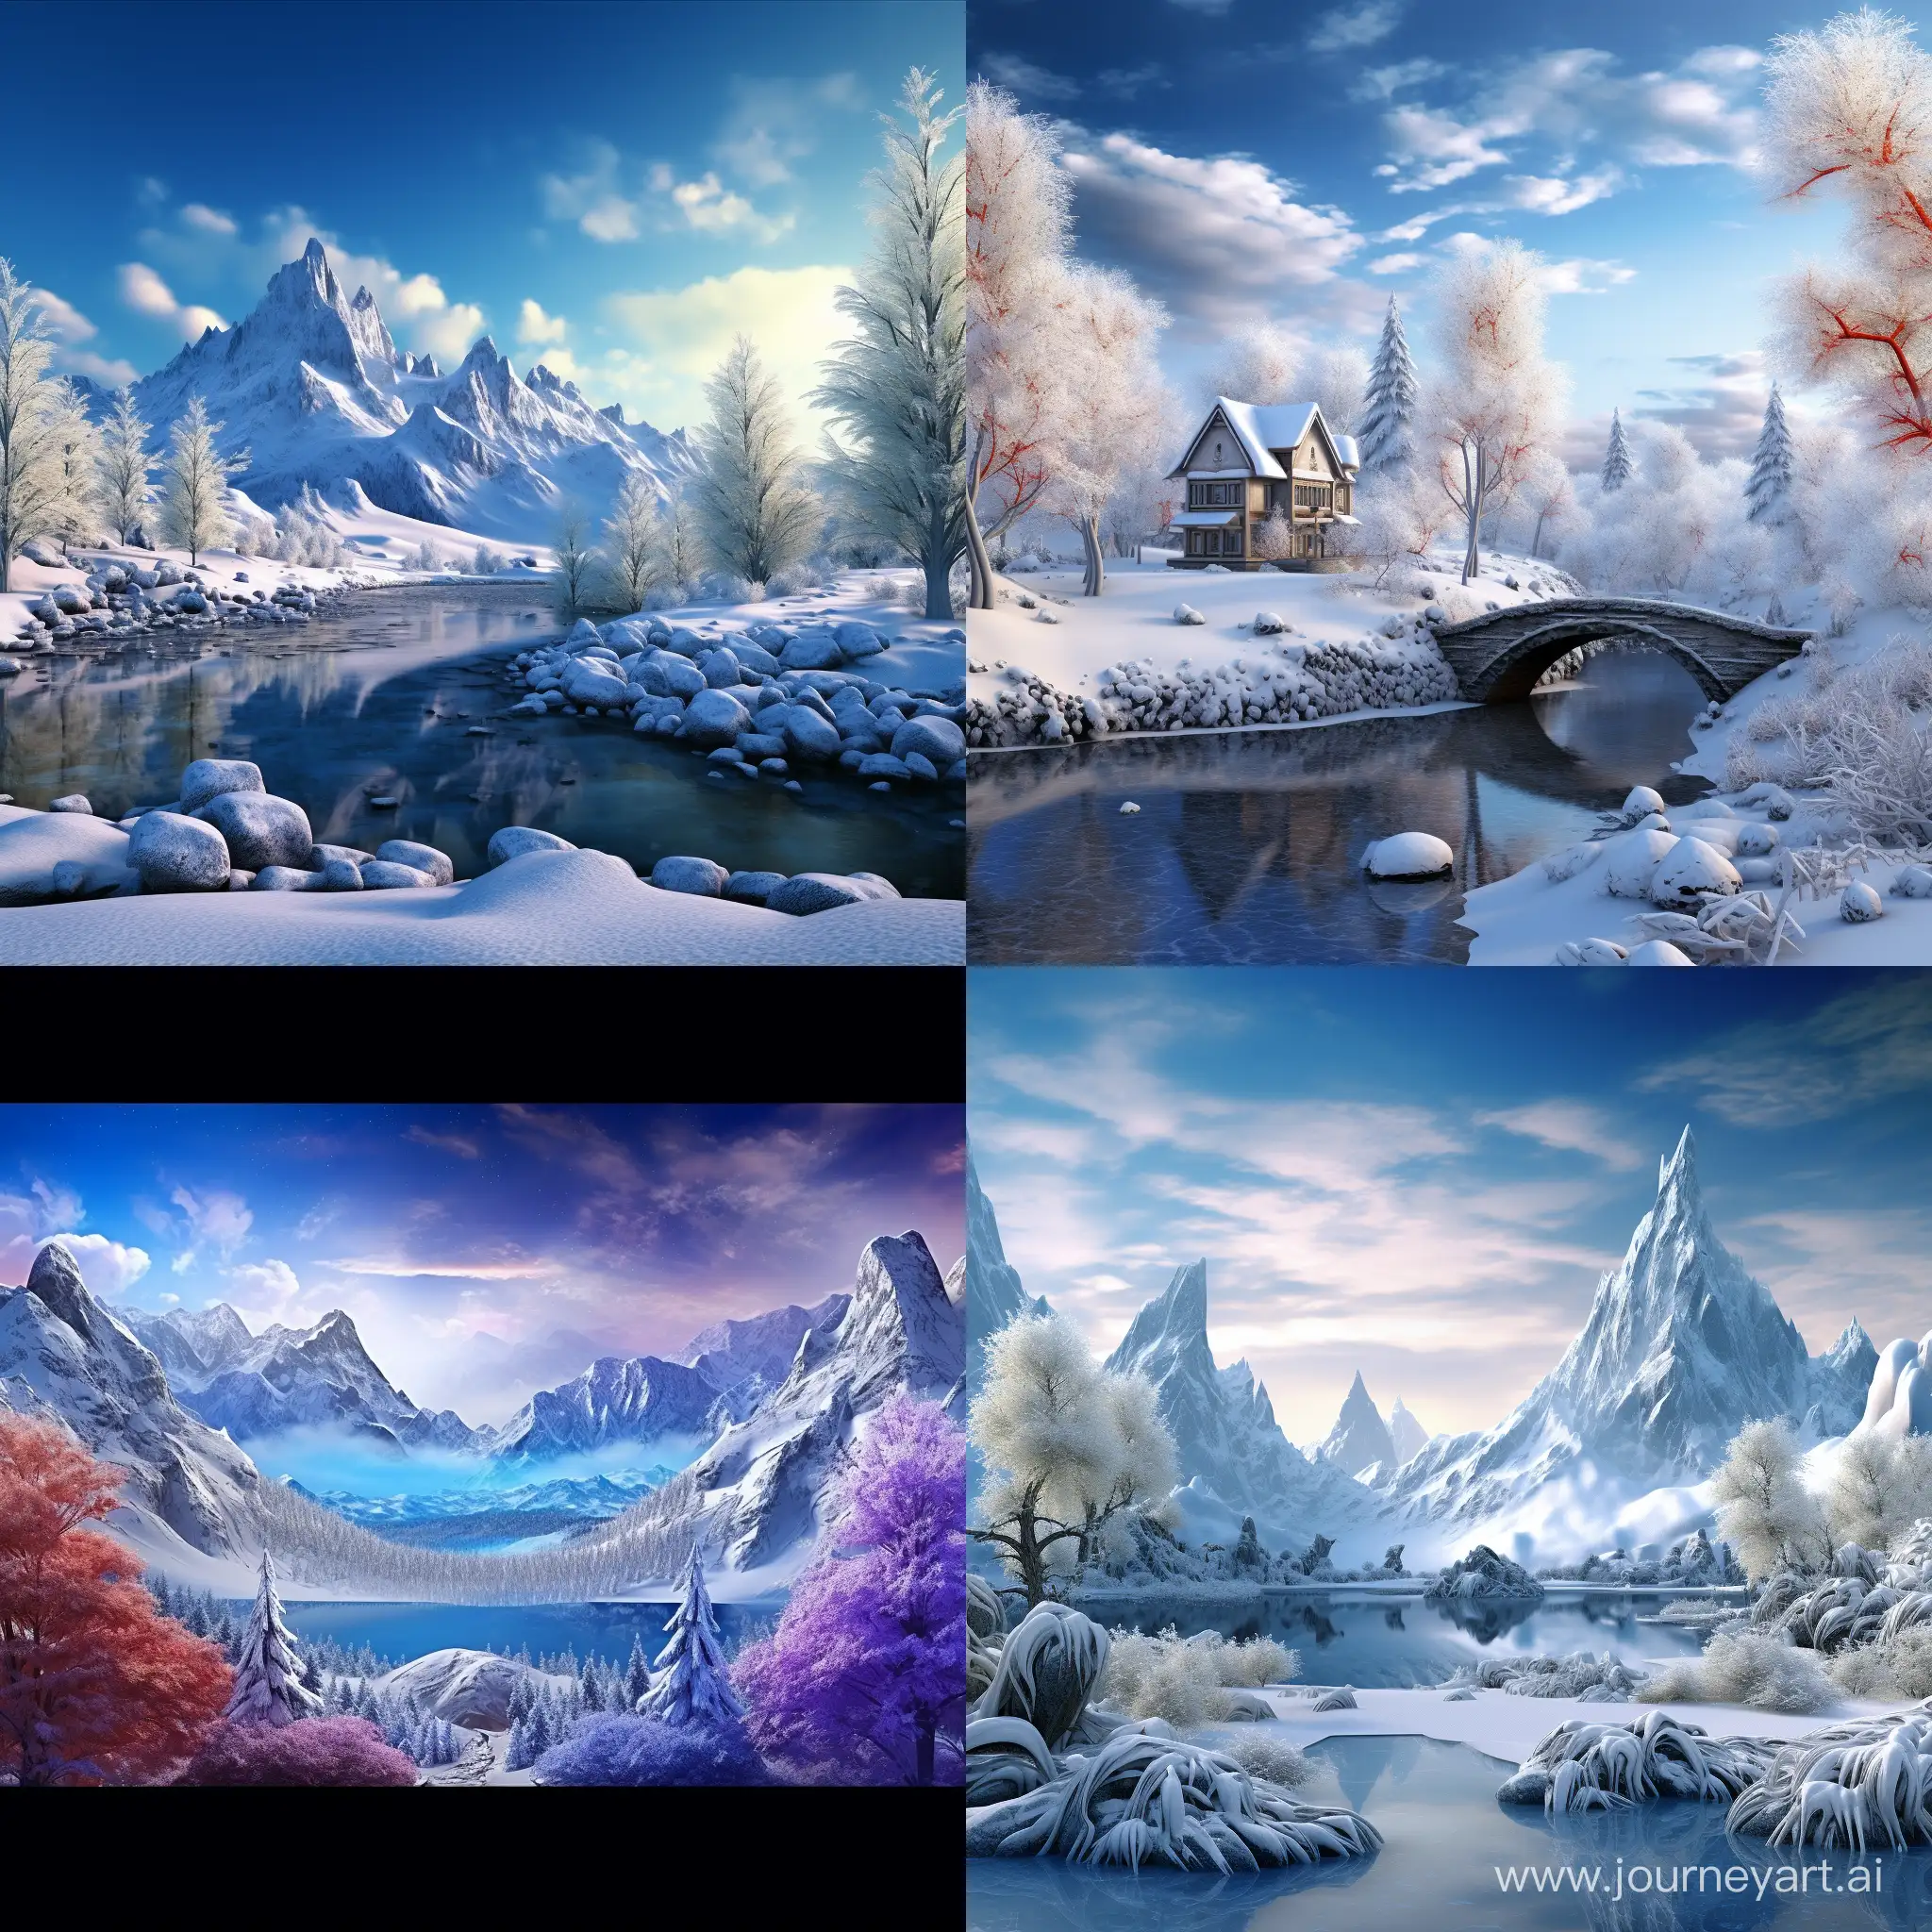 Explore-a-Snowless-Wonderland-of-Fantasy-Magic-in-HighDefinition